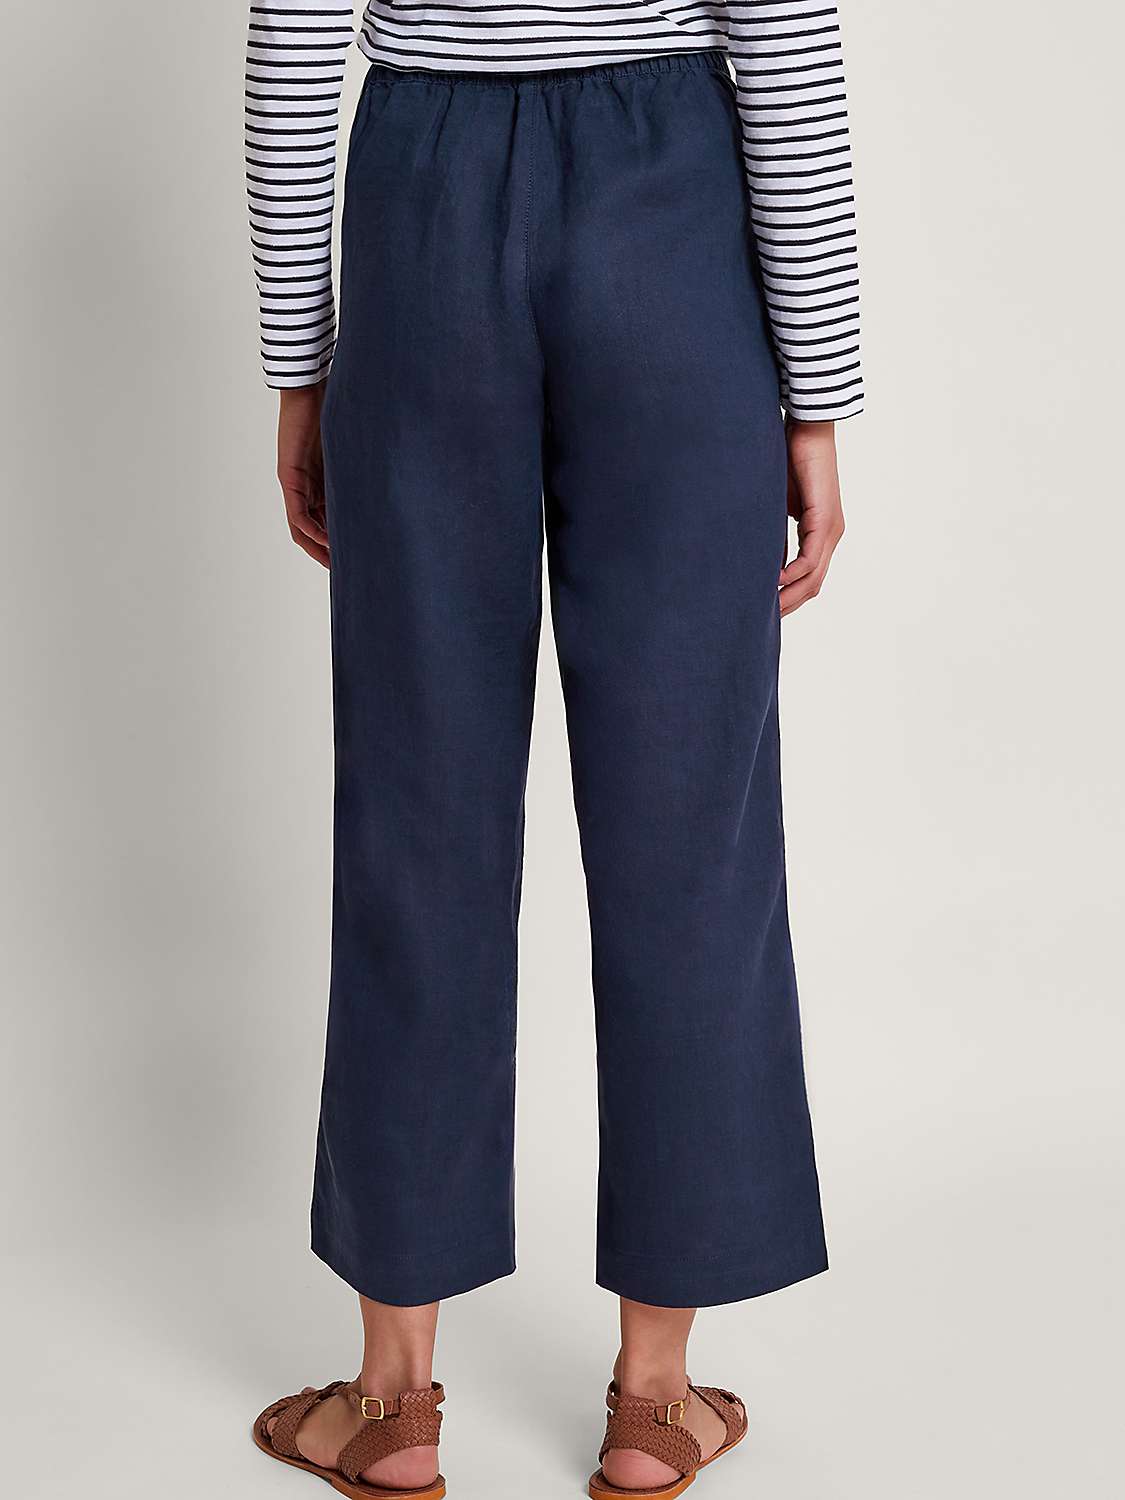 Buy Monsoon Parker Linen Short Cropped Trousers, Navy Online at johnlewis.com